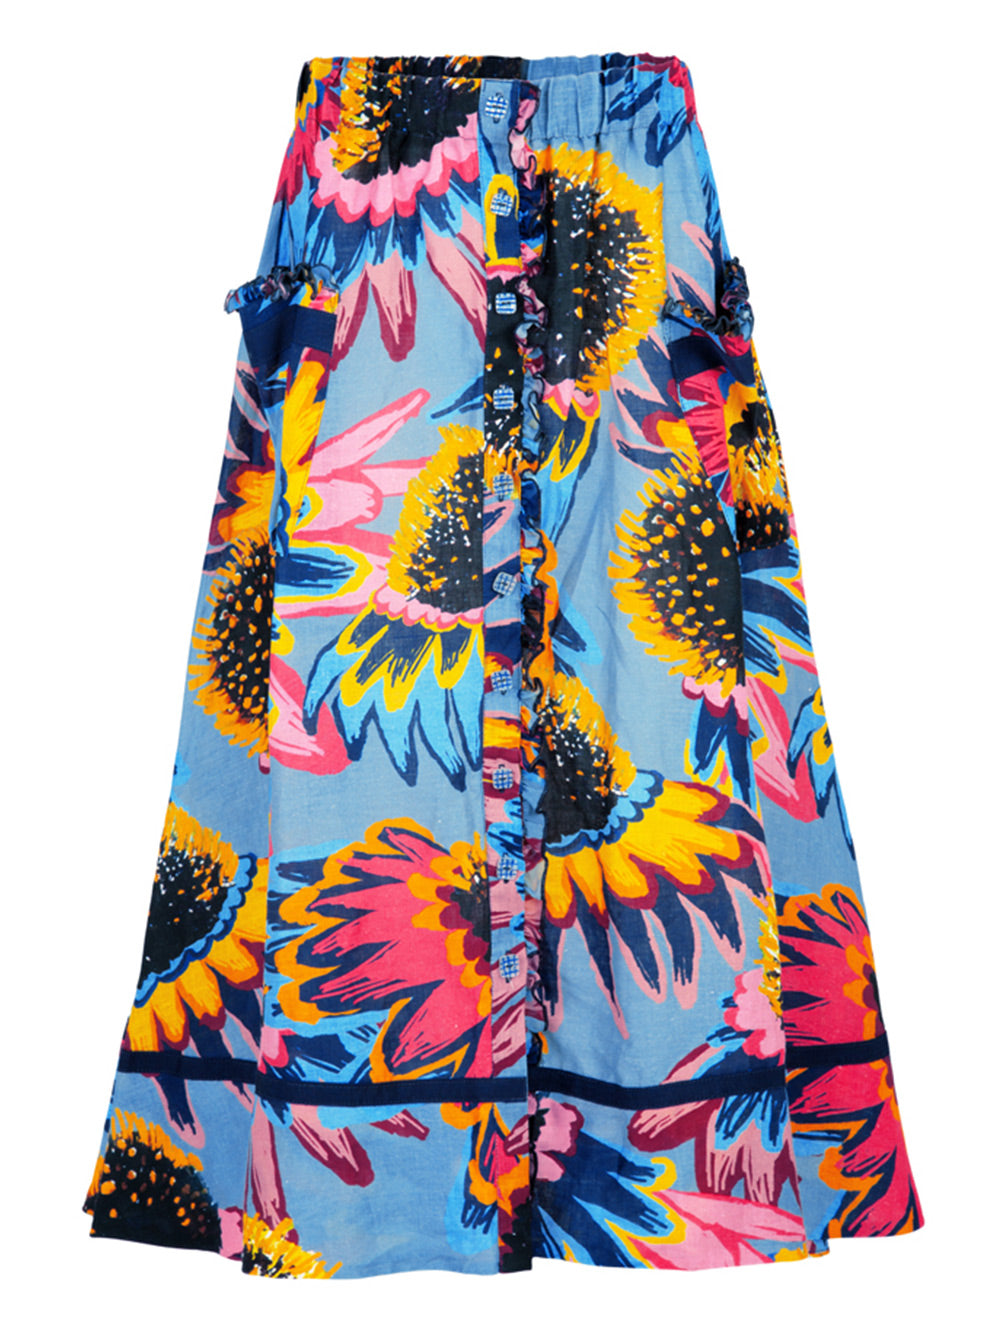 CURATE BY TRELISE COOPER CUTE AS A BUTTON SKIRT